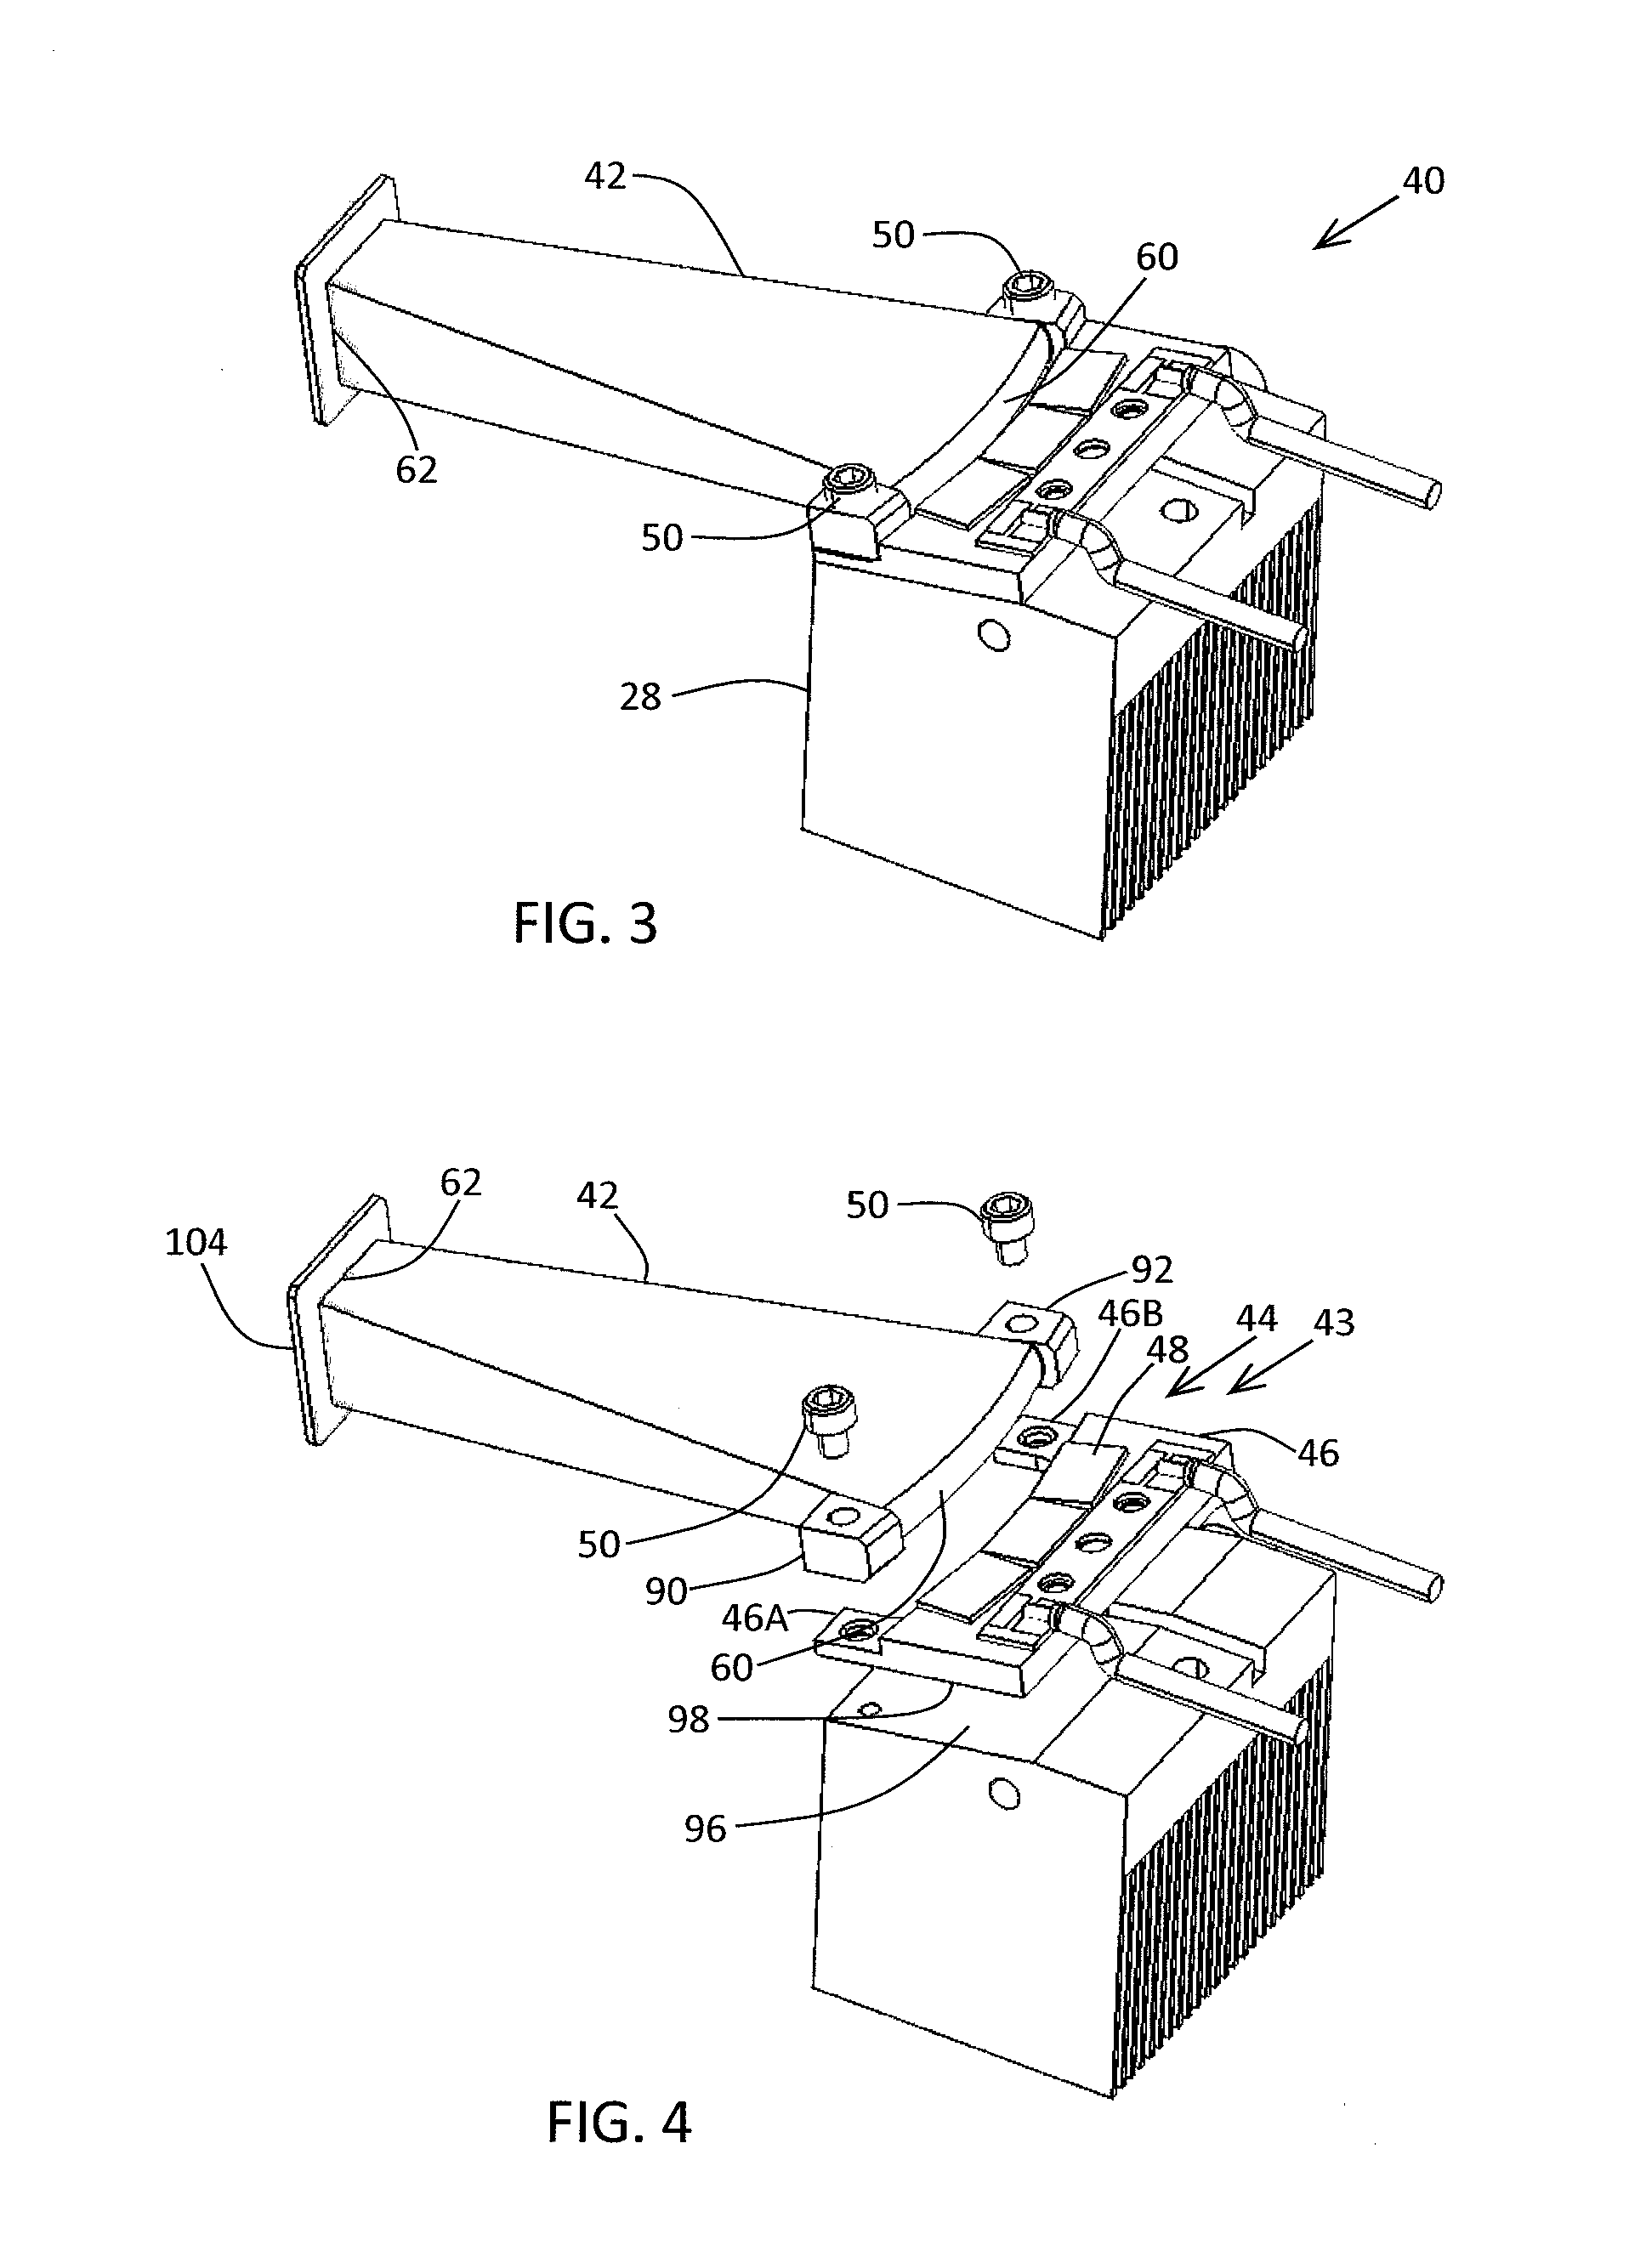 Single-emitter diode based light homogenizing apparatus and a hair removal device employing the same